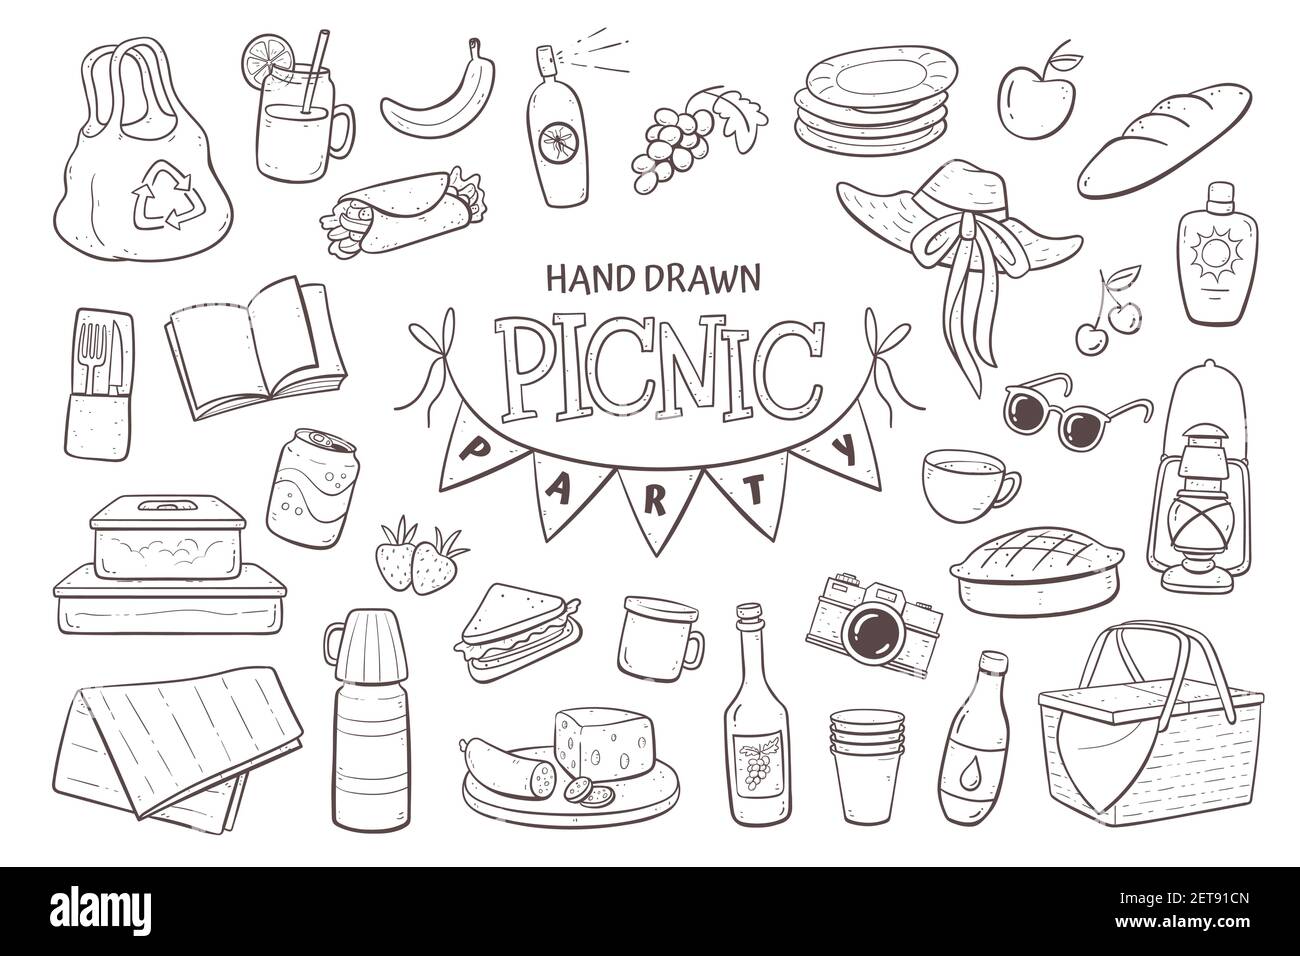 Picnic doodle set. Hand drawn picnic elements isolated on white background. Stock Vector